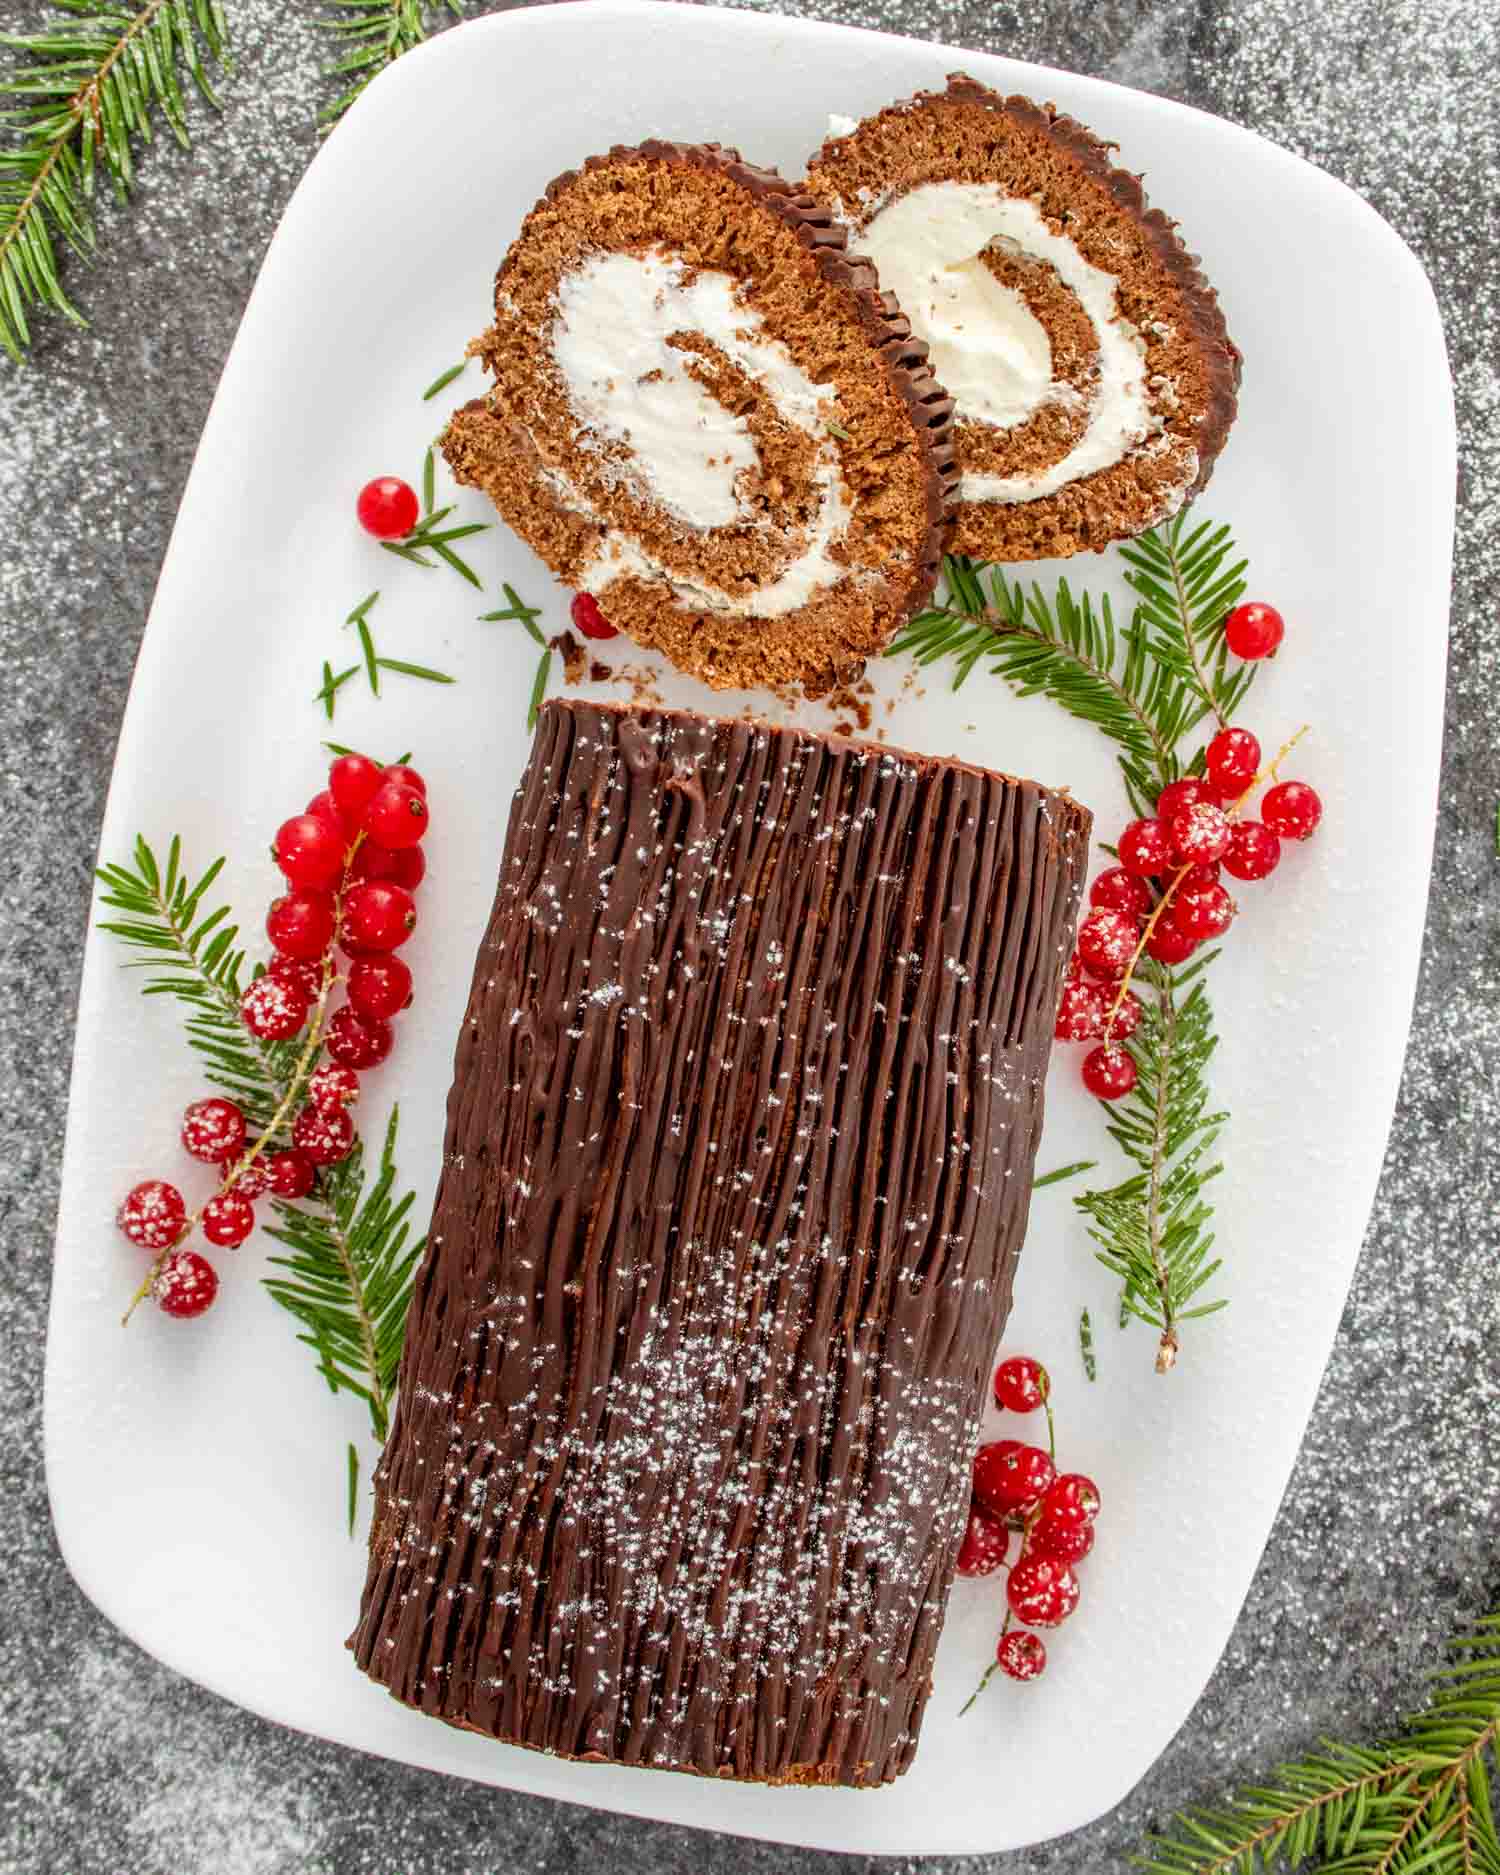 a buche de noel (yule log cake) on a white cake platter, with two slices cut out.